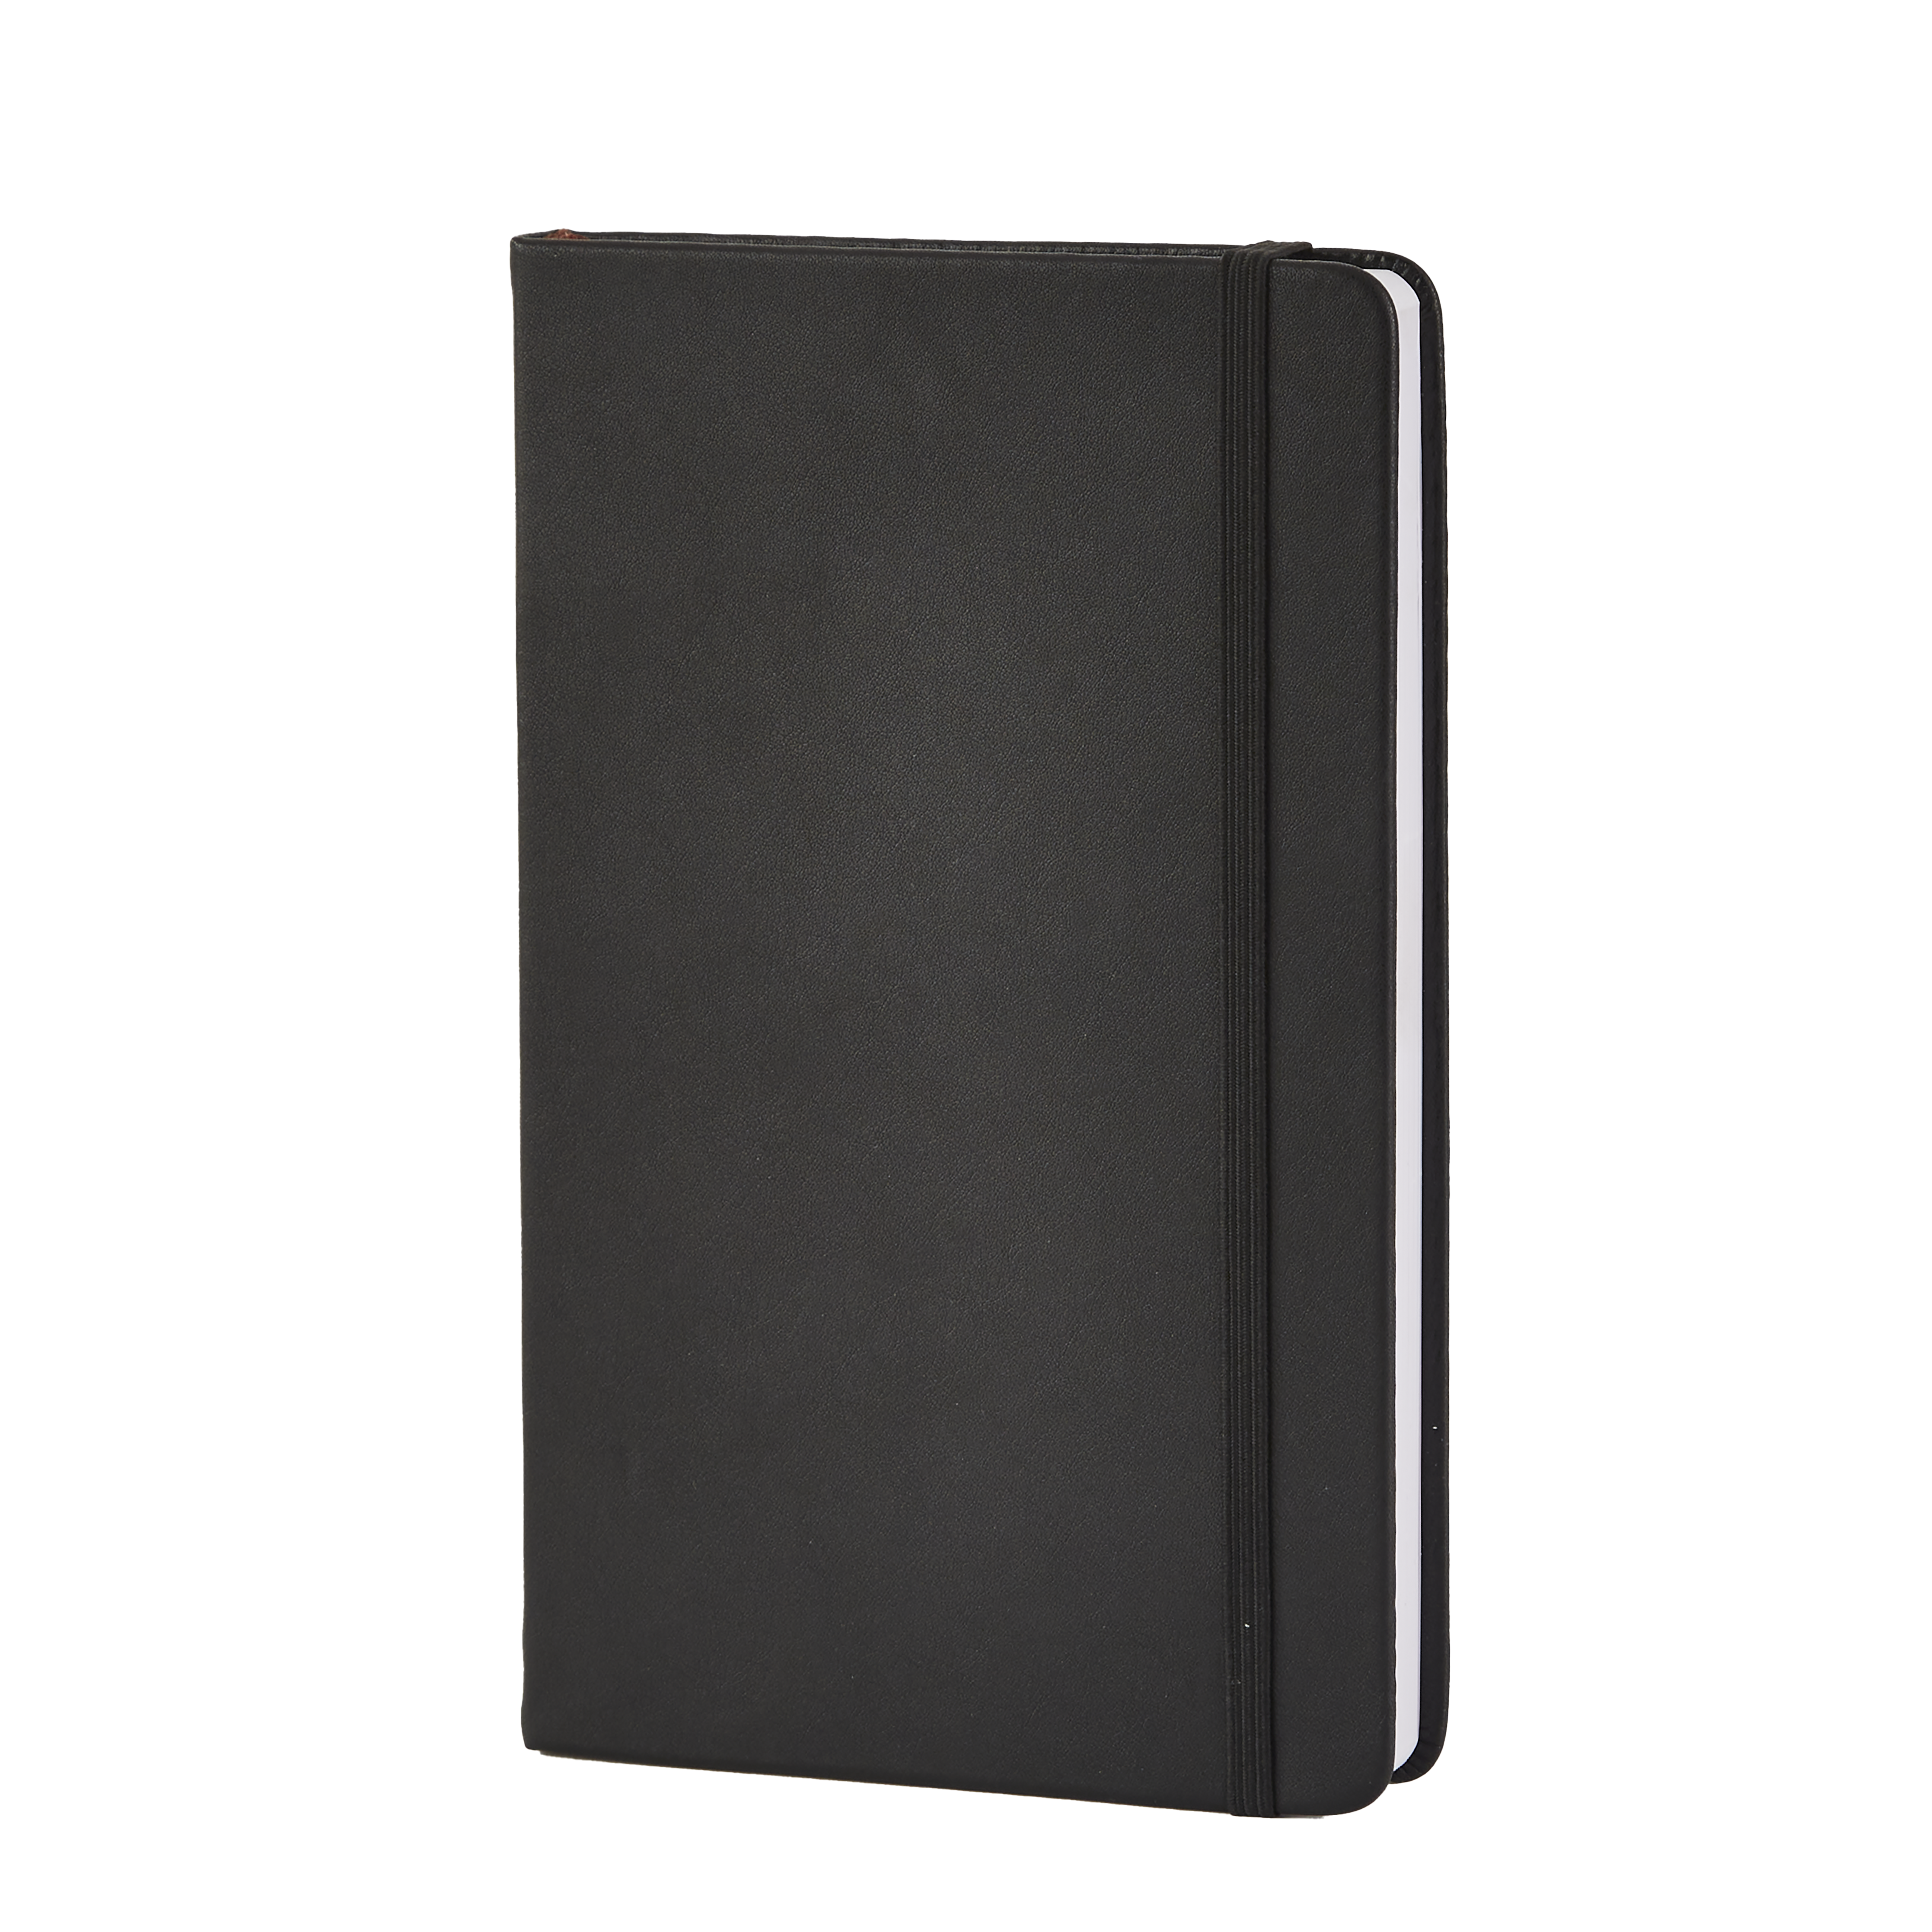 OTL Classic Hardcover 'Leather' Ruled Notebook